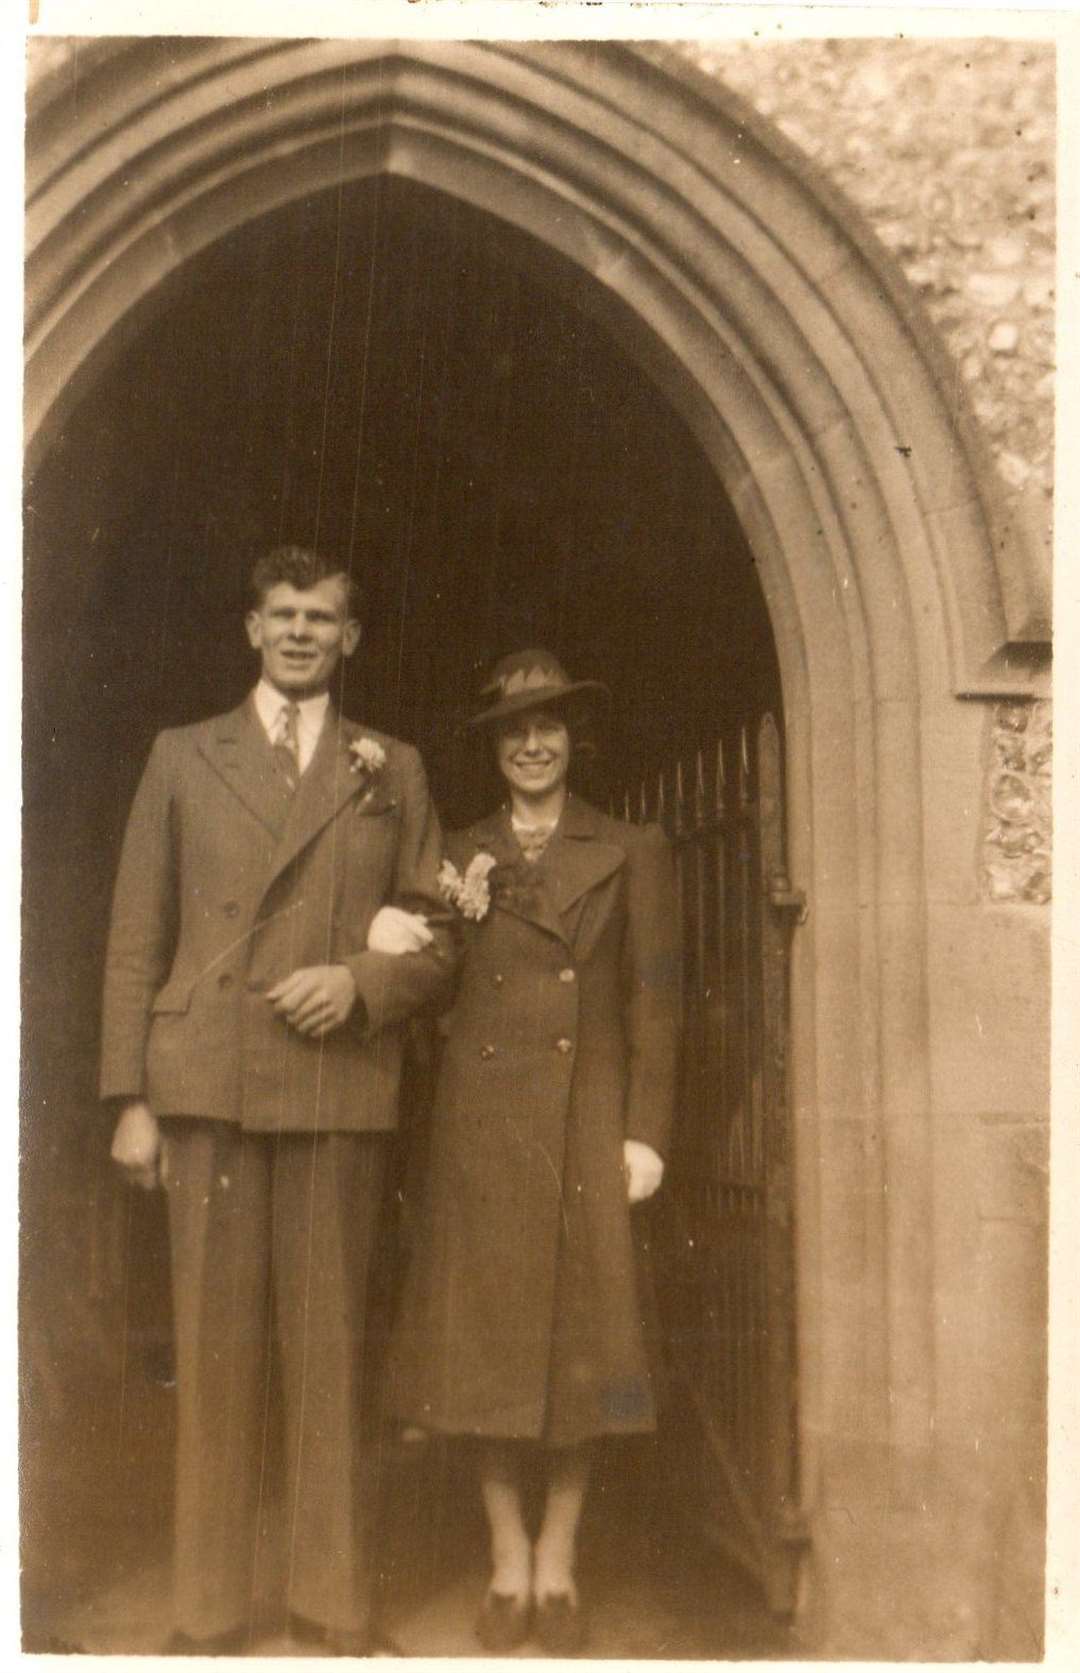 Wilfred George Honey, who died while on duty four days after his 21st birthday in 1941, married Violet May Holdstock on March 16, 1940 in St John the Baptist Church, Bredgar, when Wilfred was 20 and Violet was 18 (21096161)